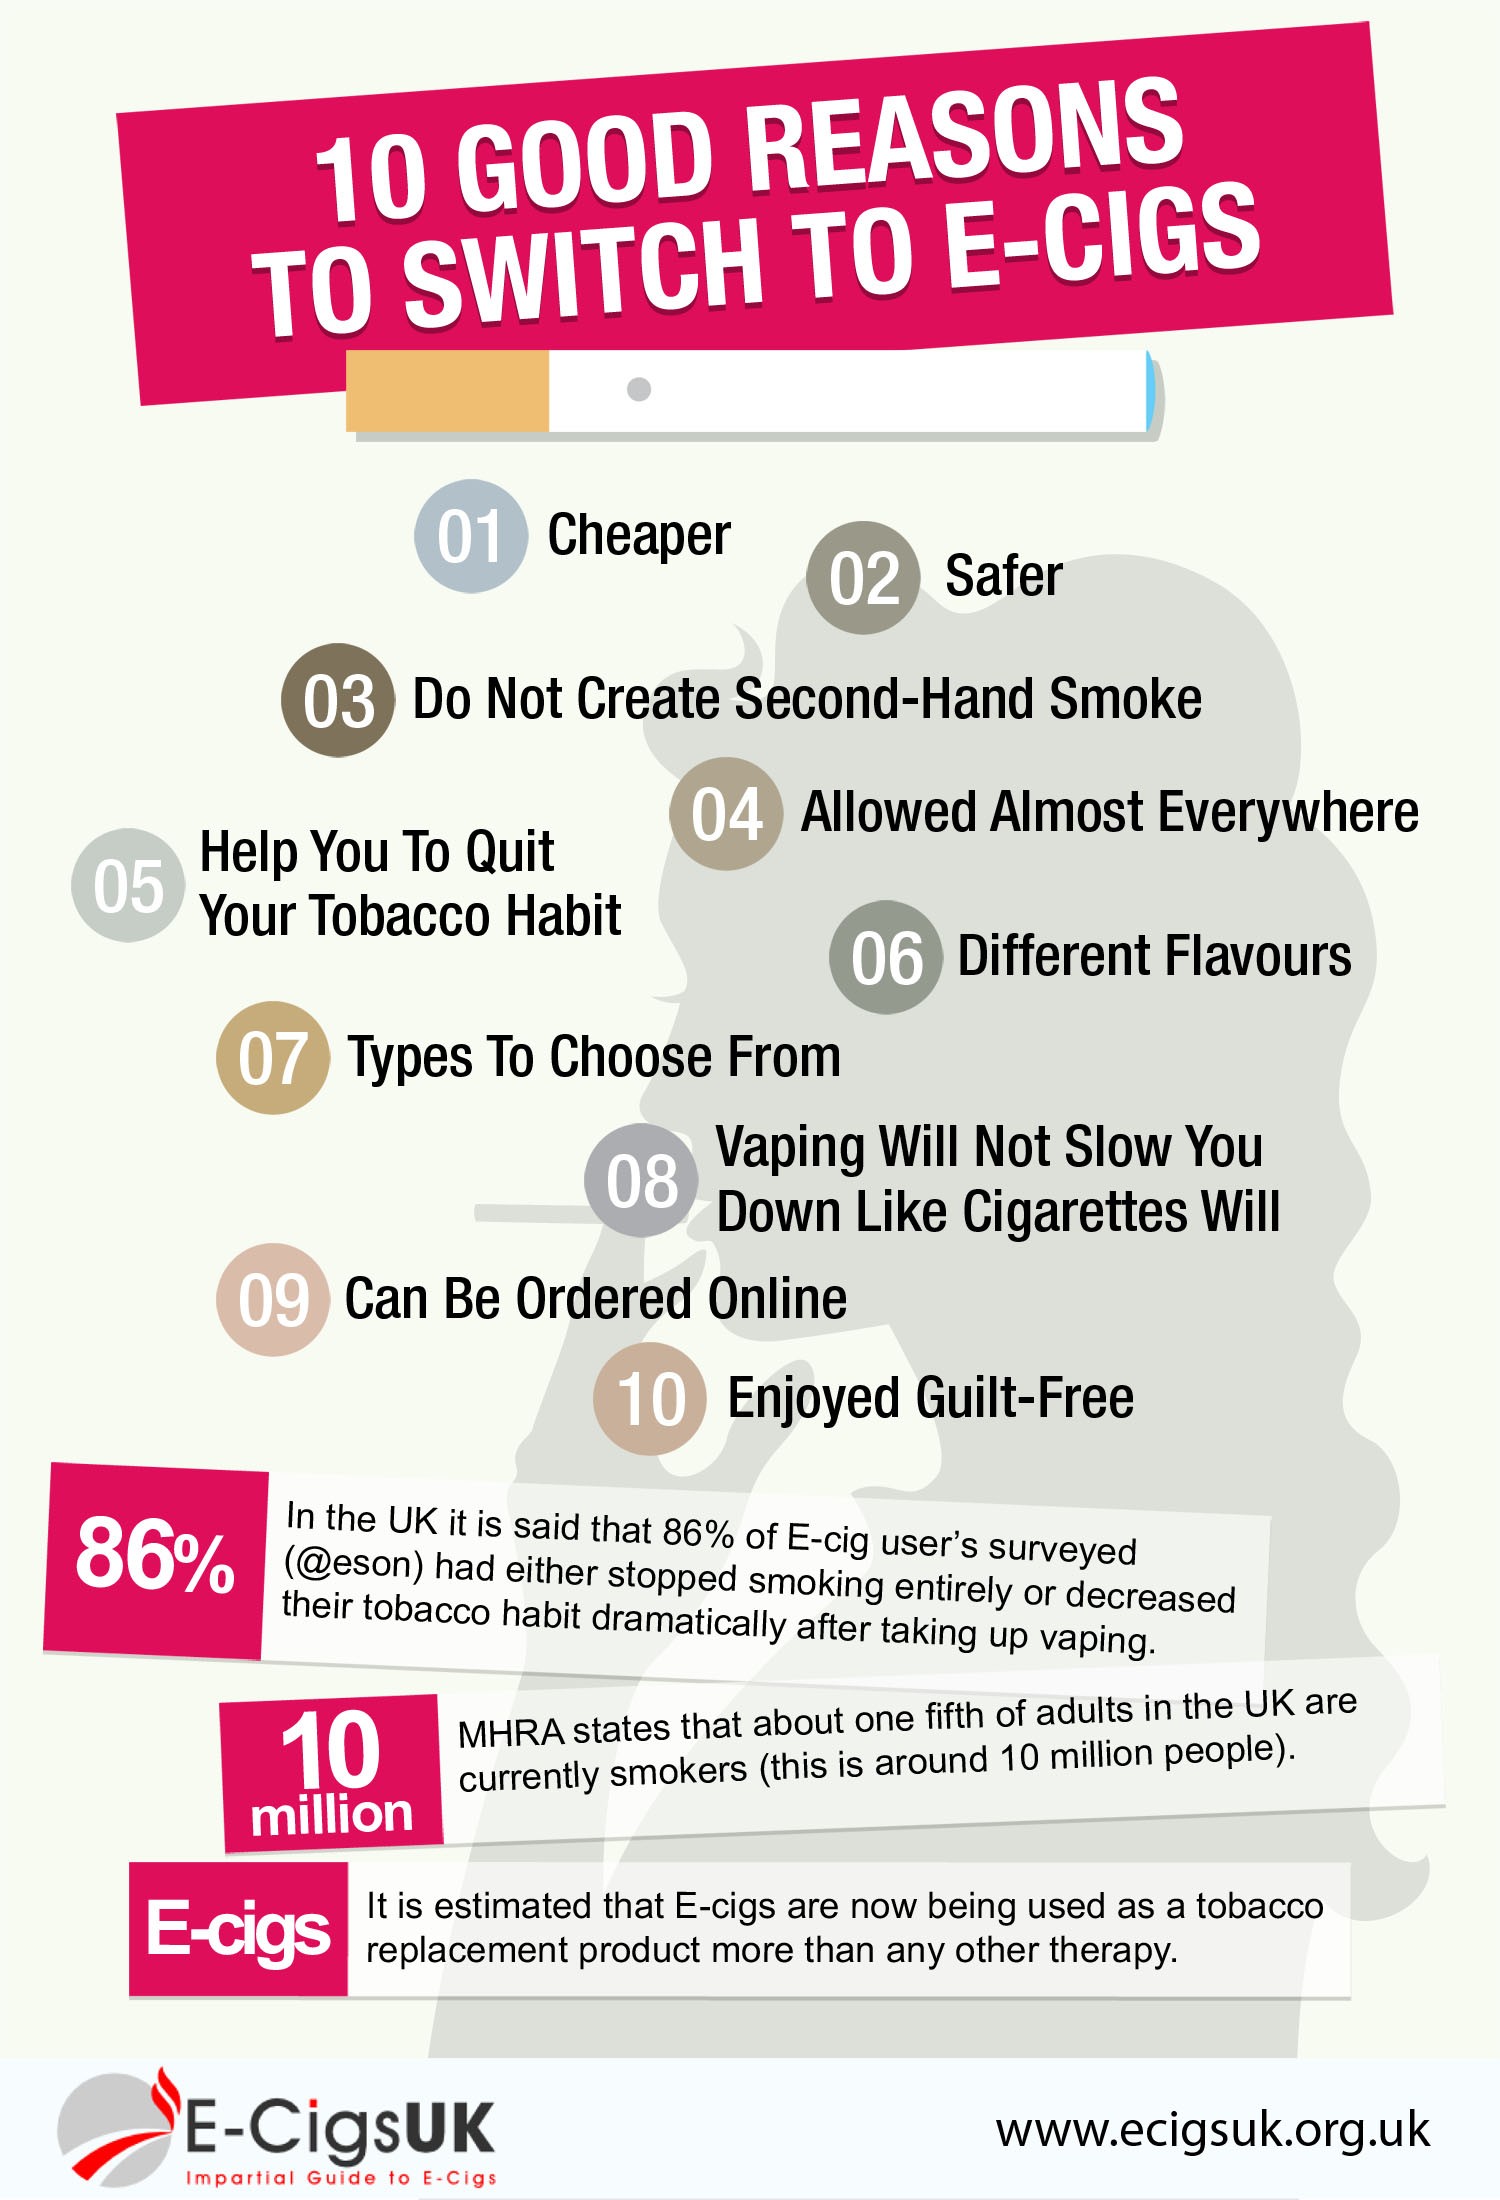 10 Reasons To Switch To E-Cigs Infographic